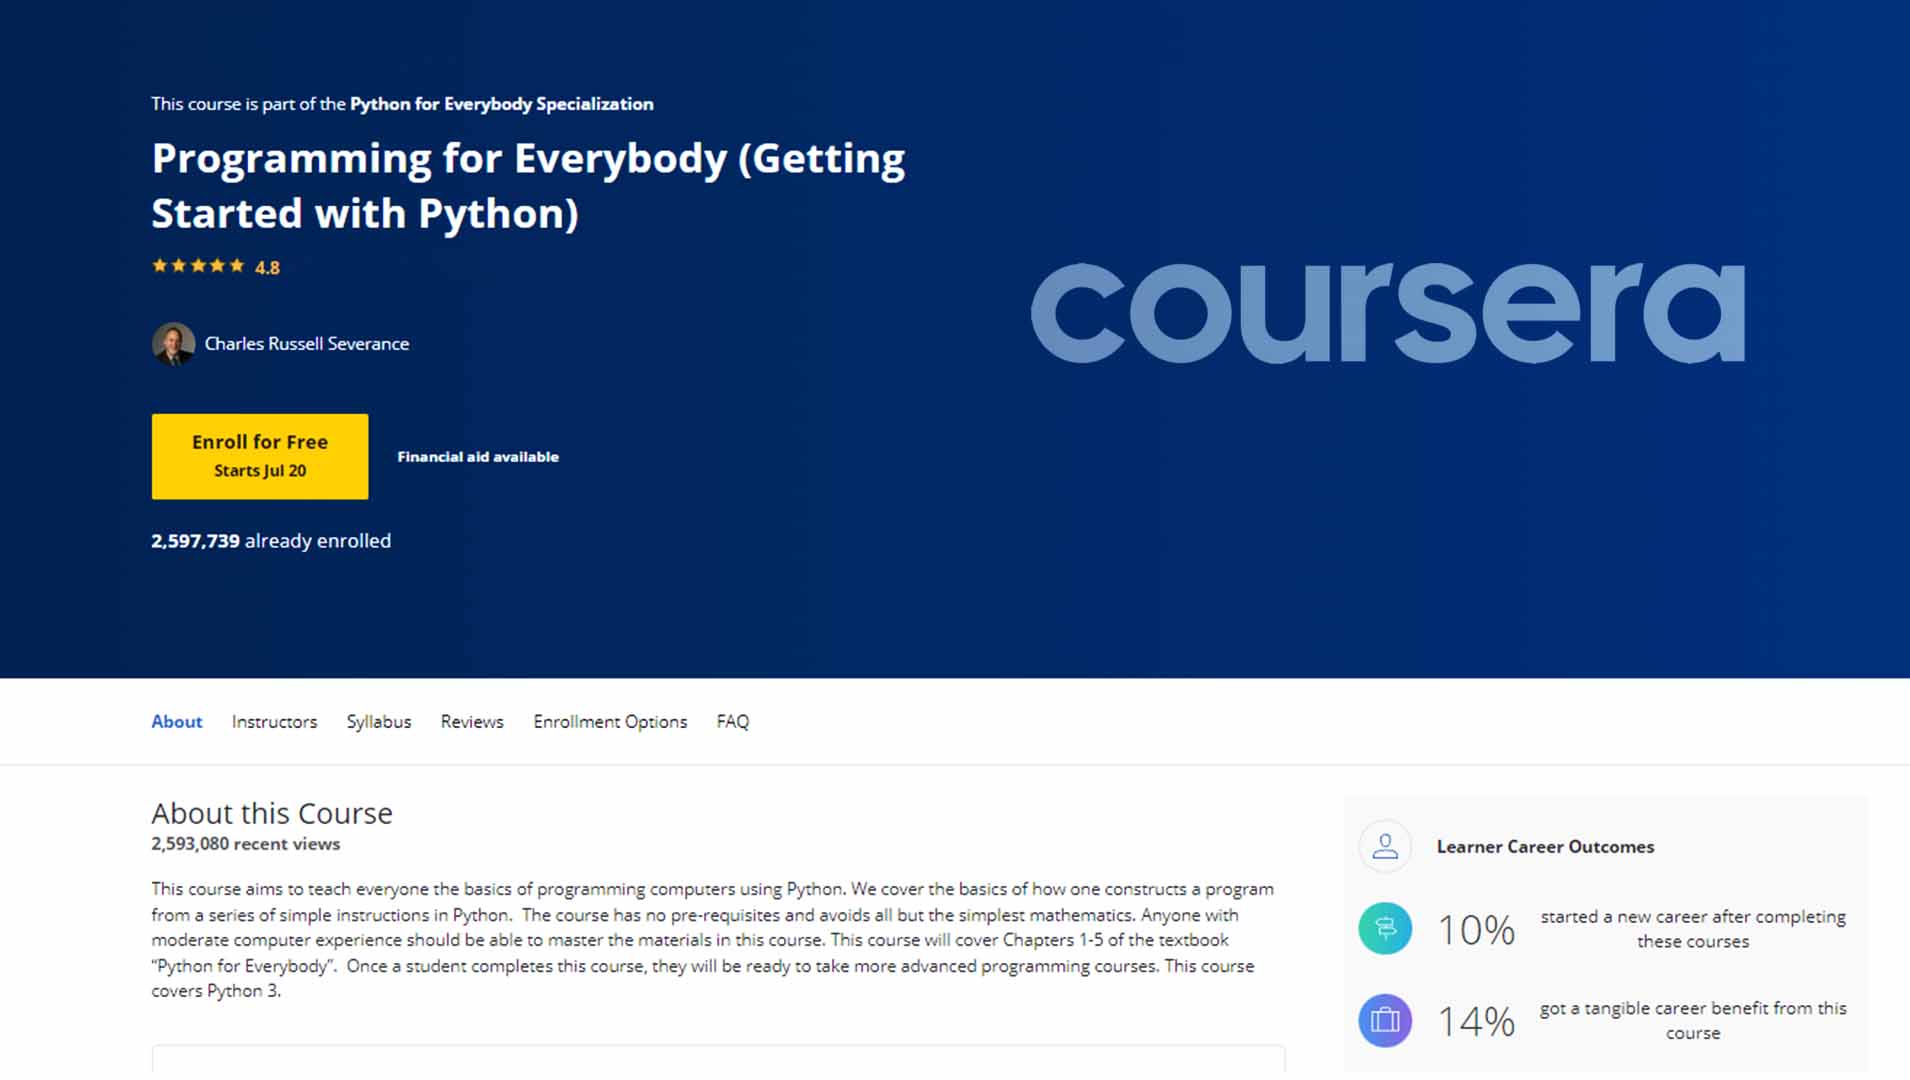 Programming for Everybody by Coursera